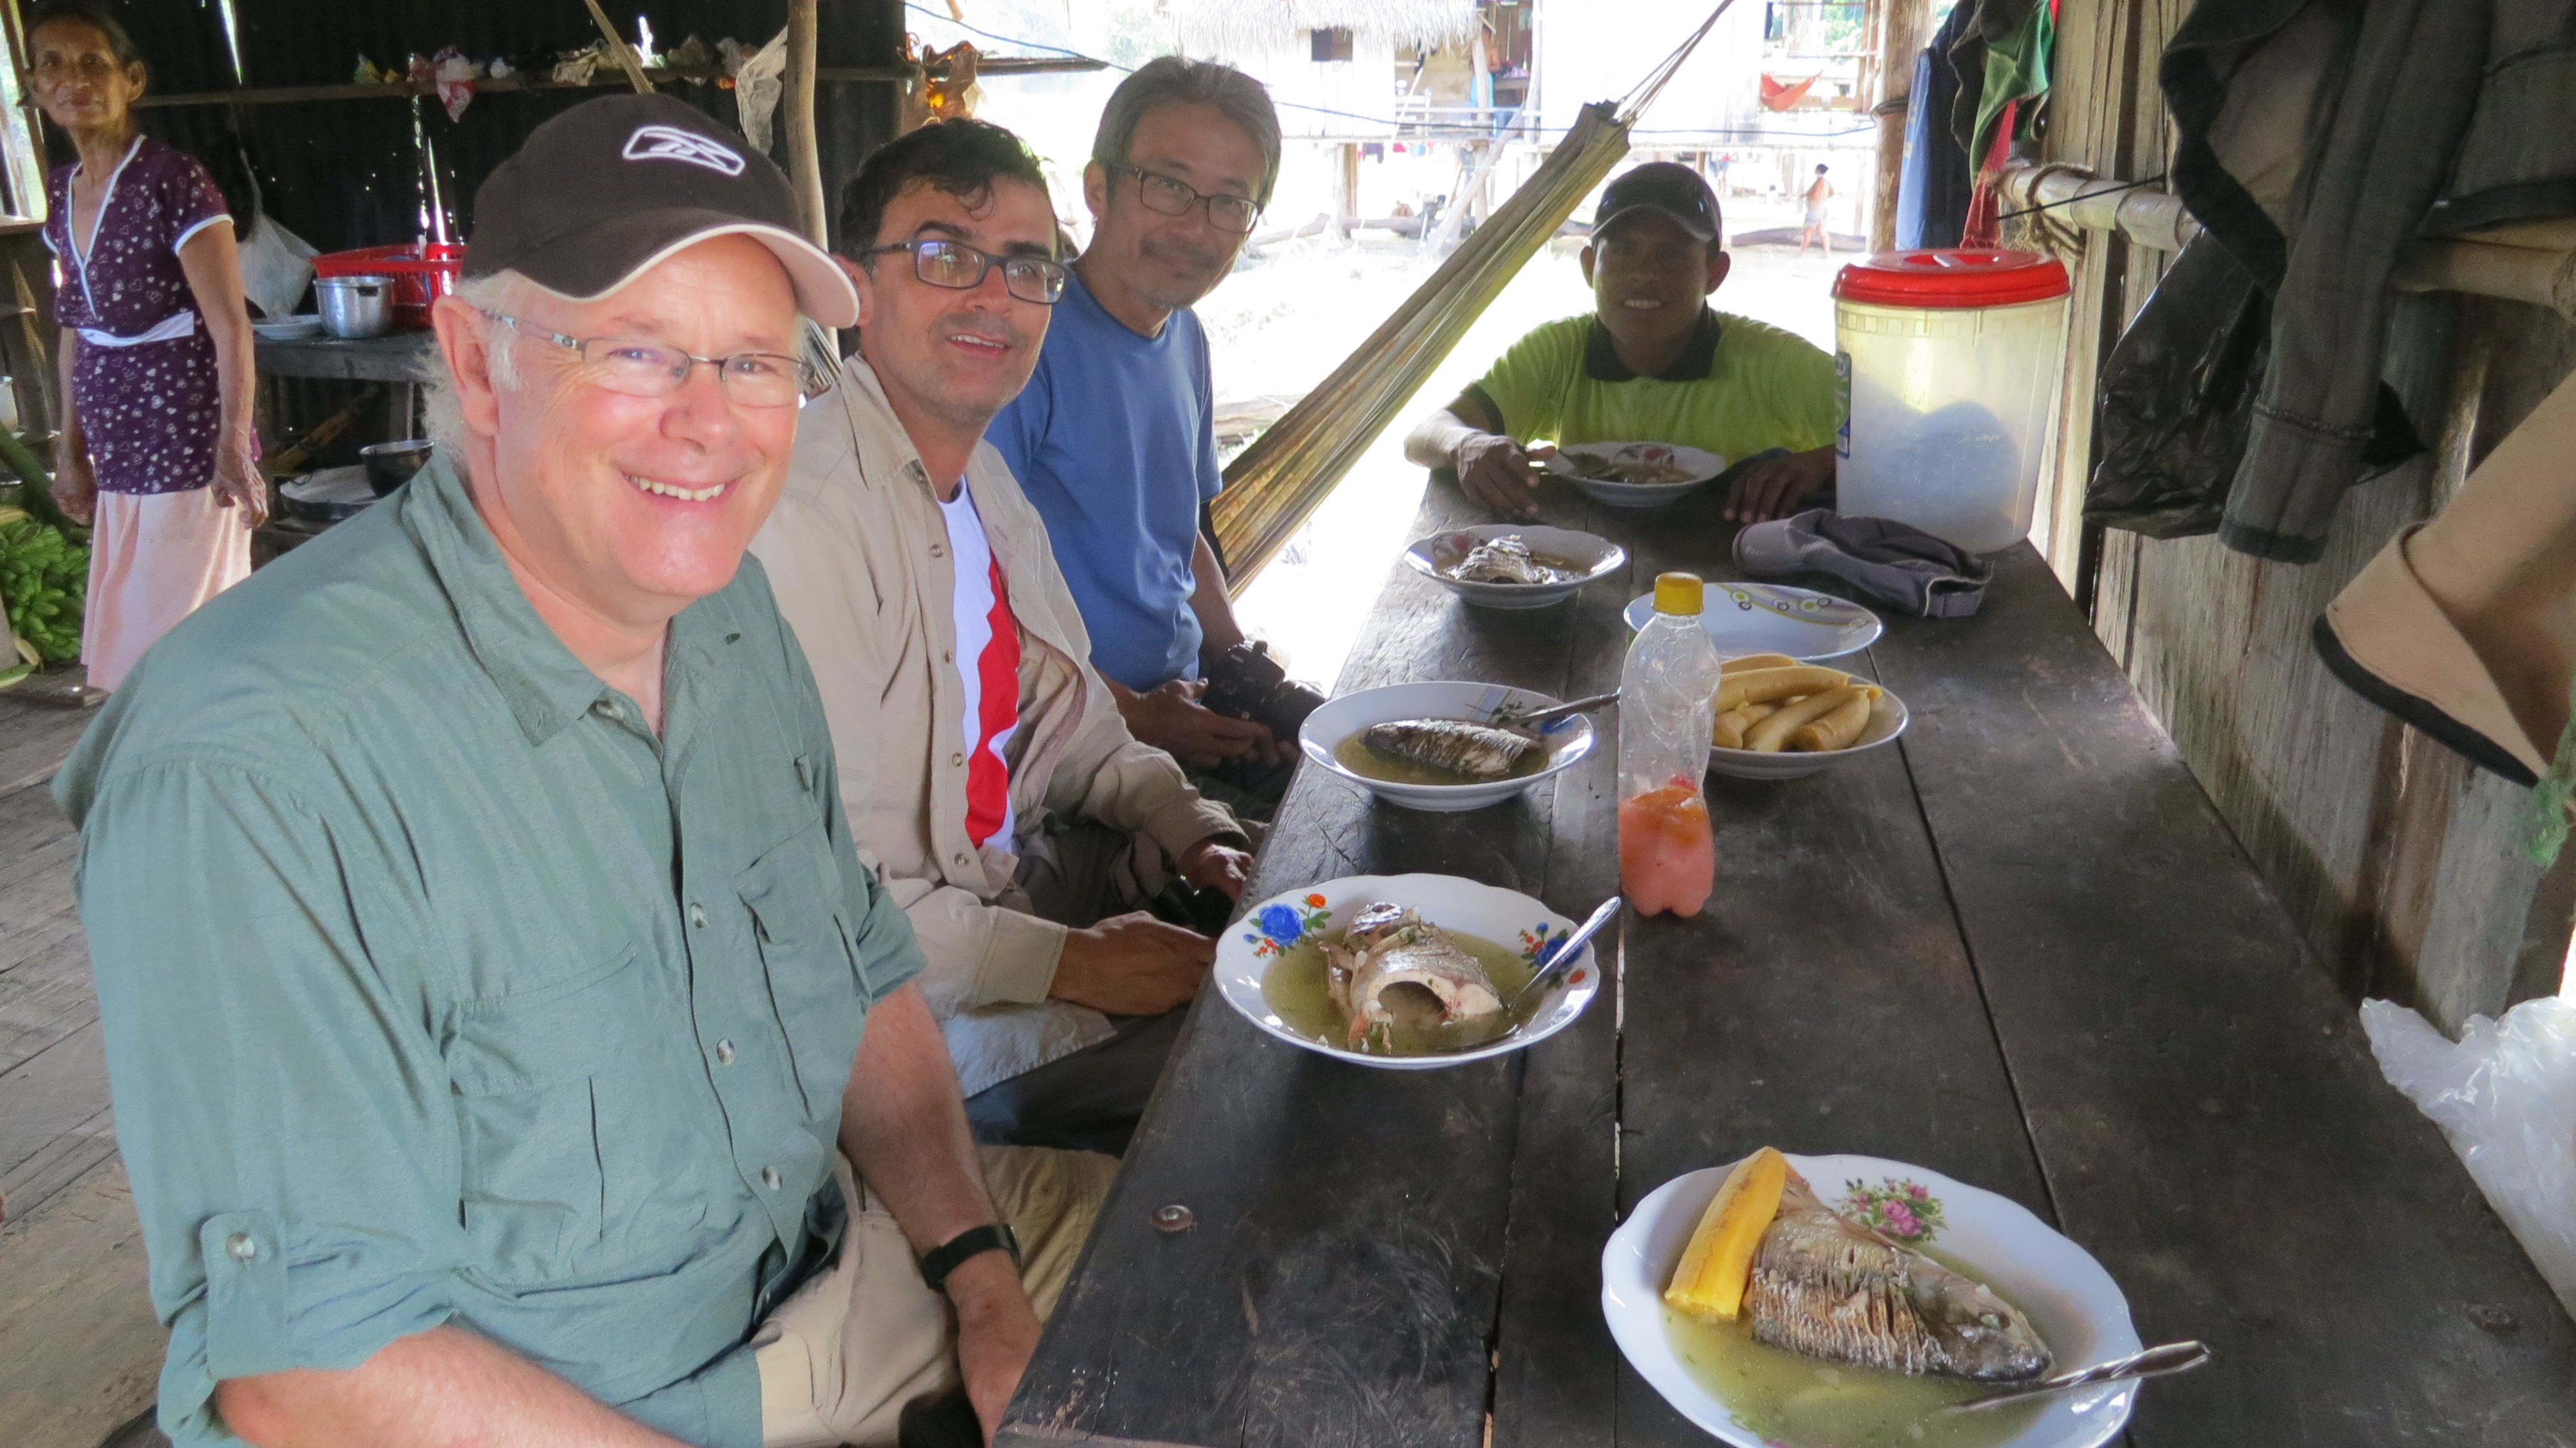 The three authors sitting on a bench having a typical Amazonian meal with freshly caught fish with plantain.